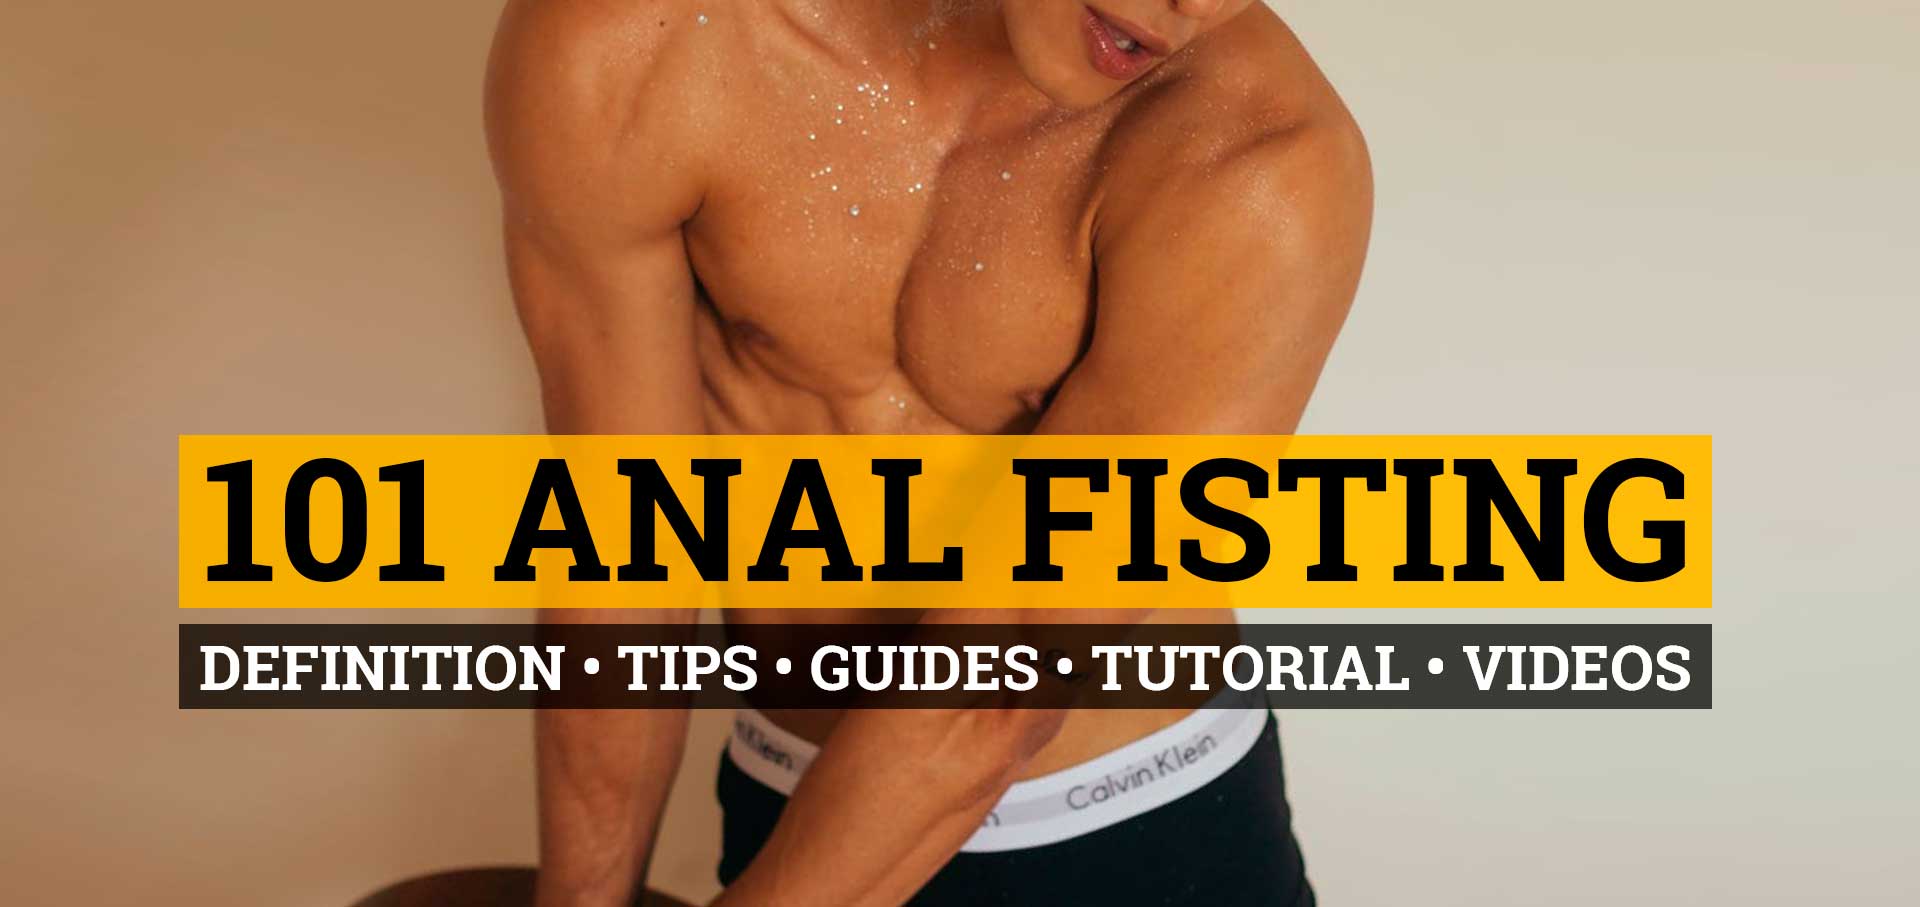 Anal fisting tutorial